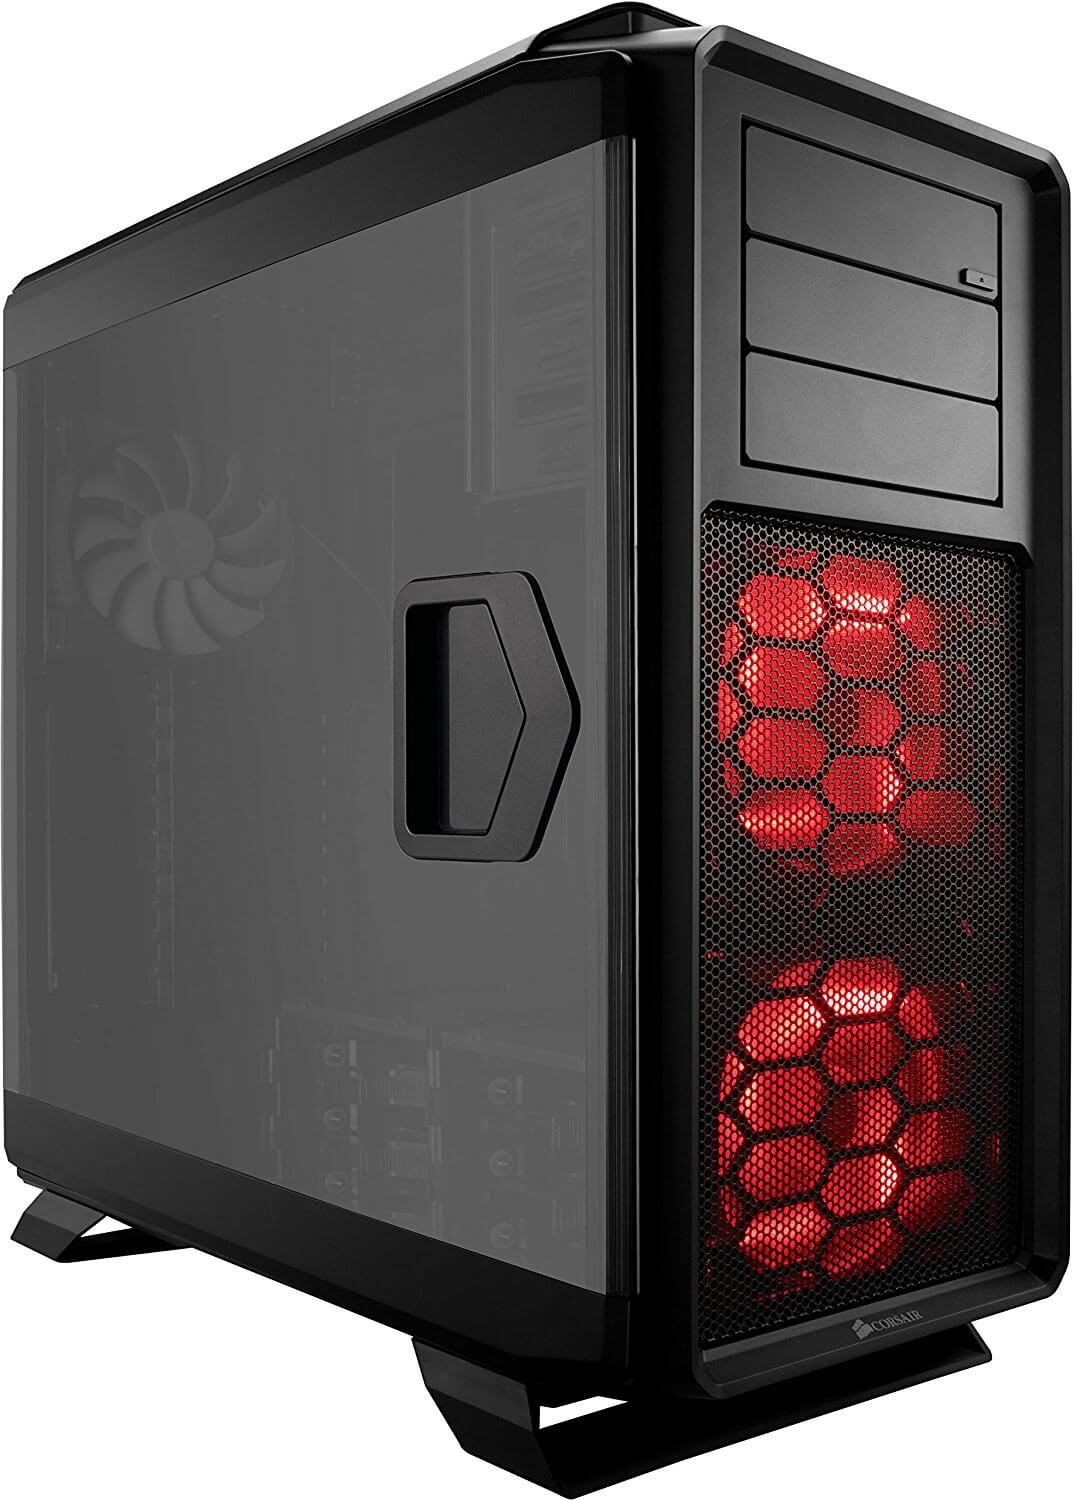 Corsair Graphite 760T: The best premium PC case out there